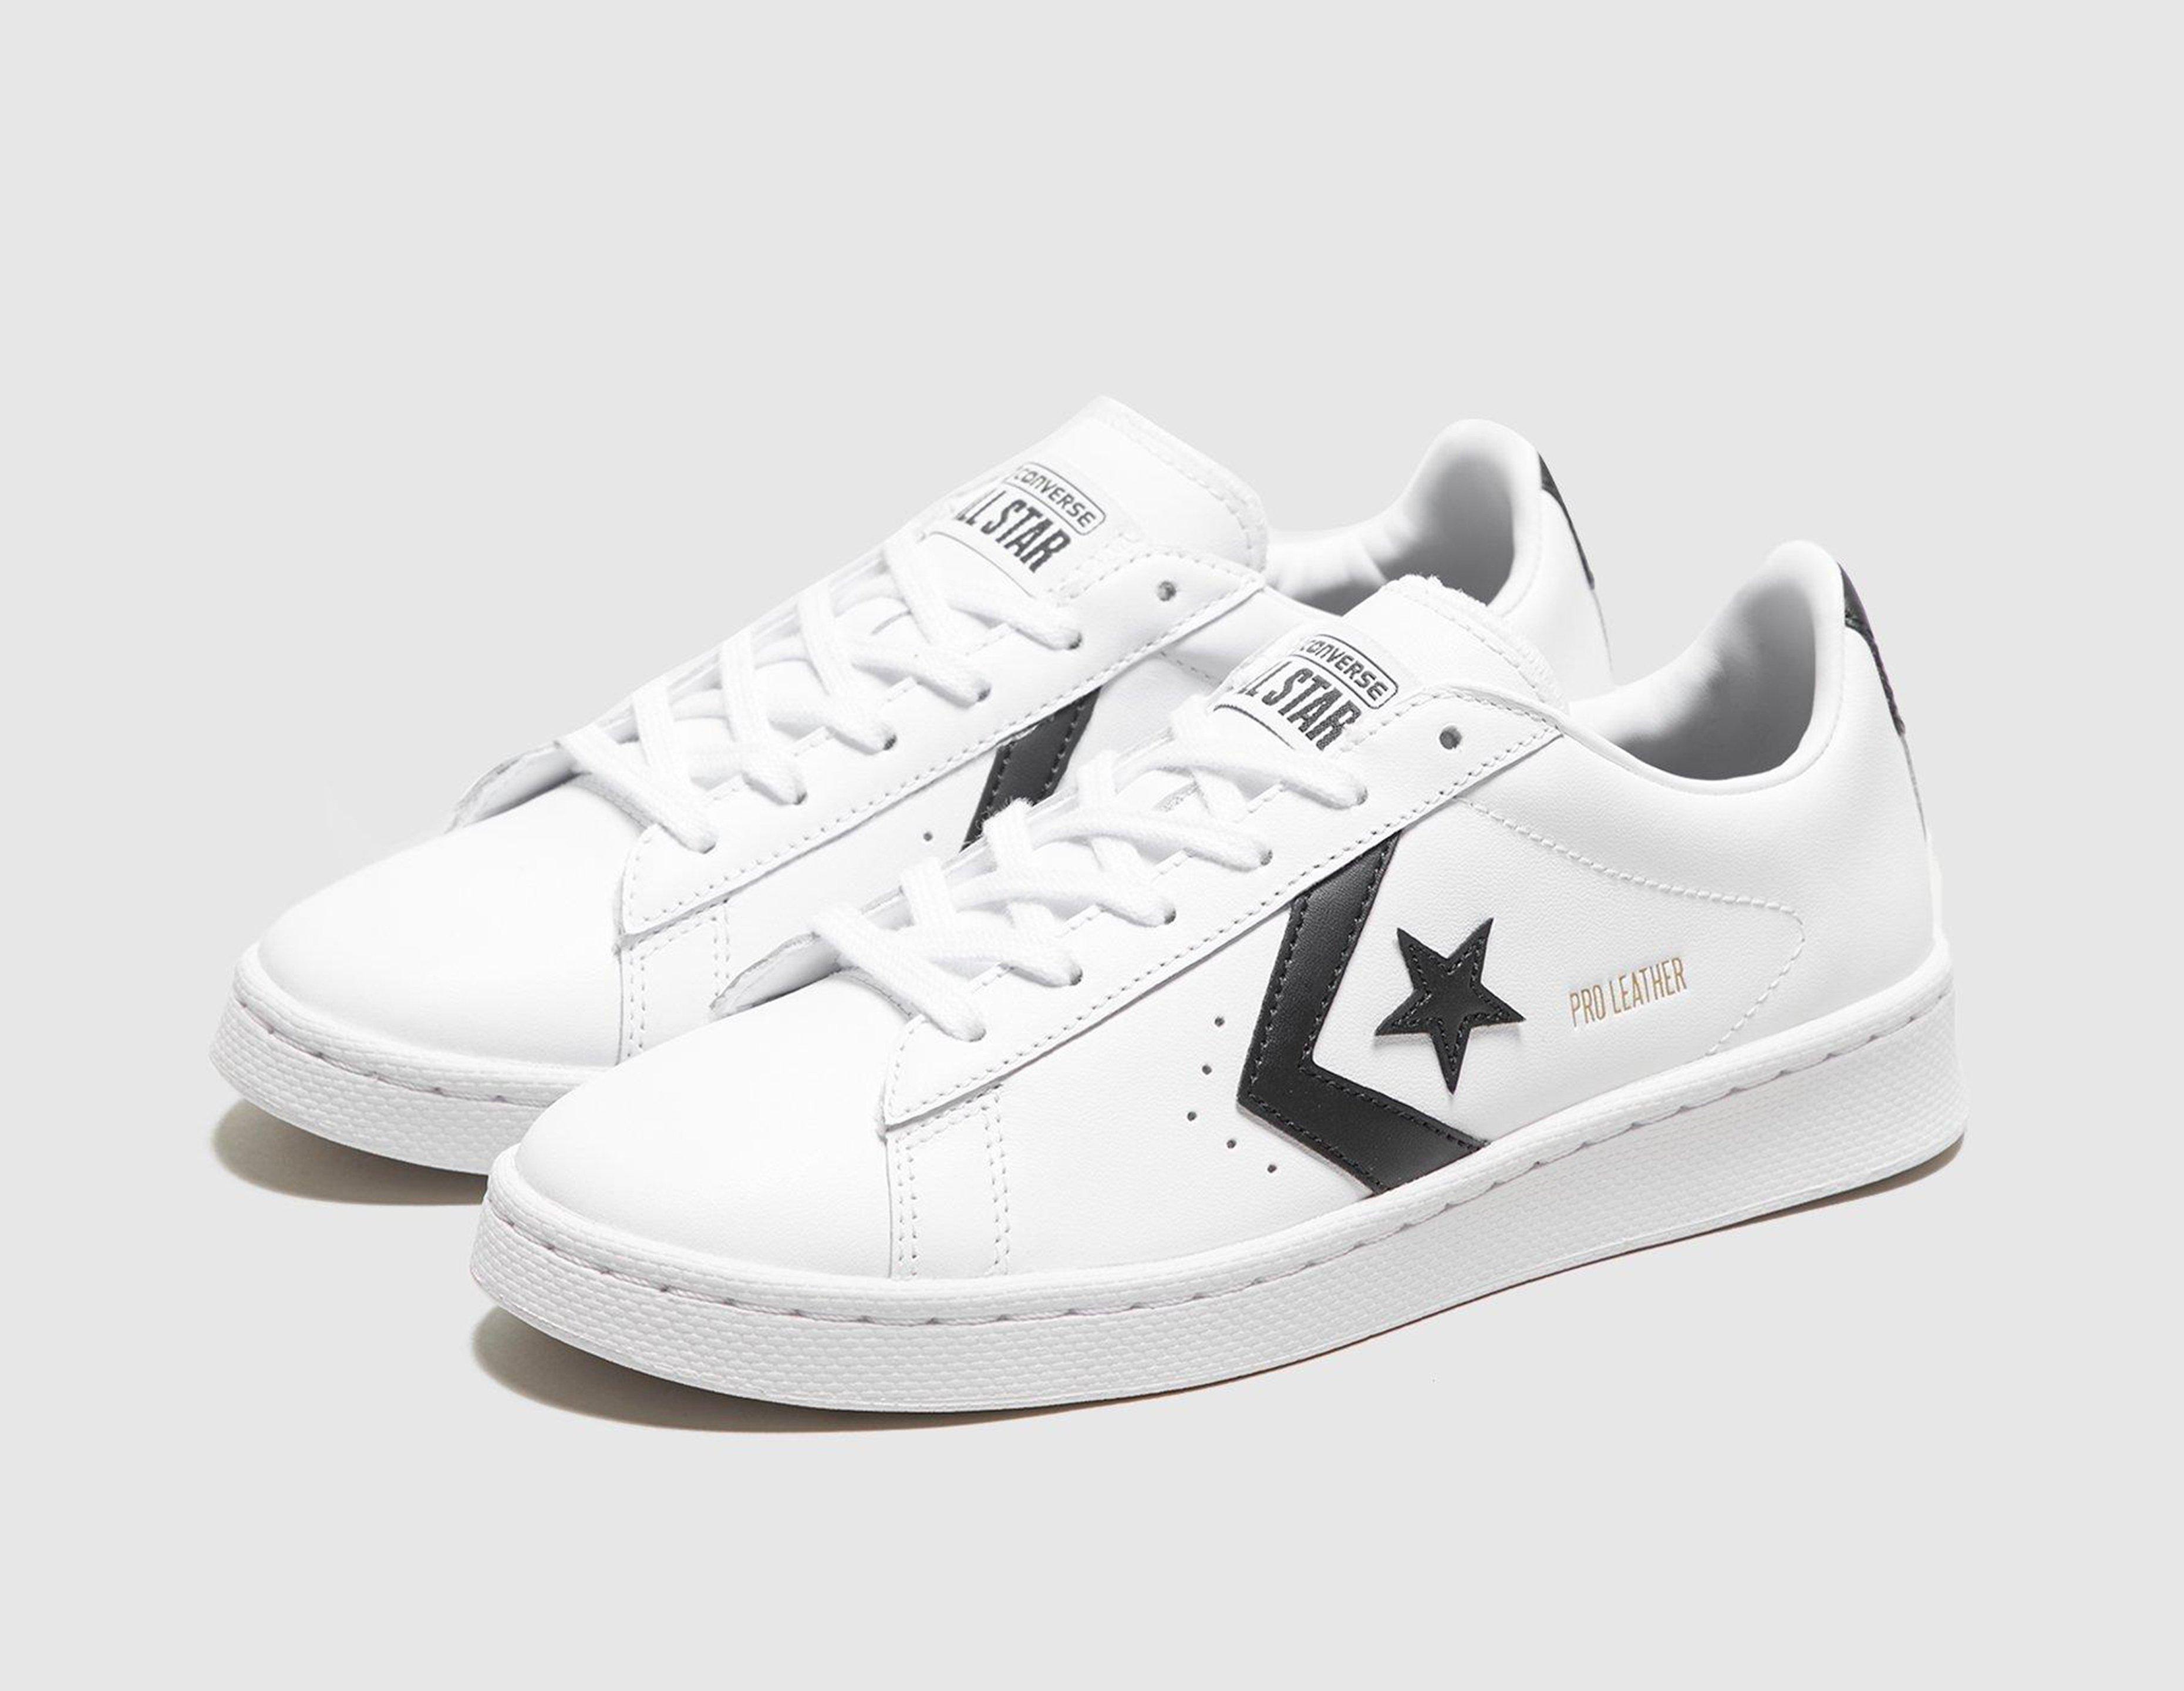 converse leather ox women's